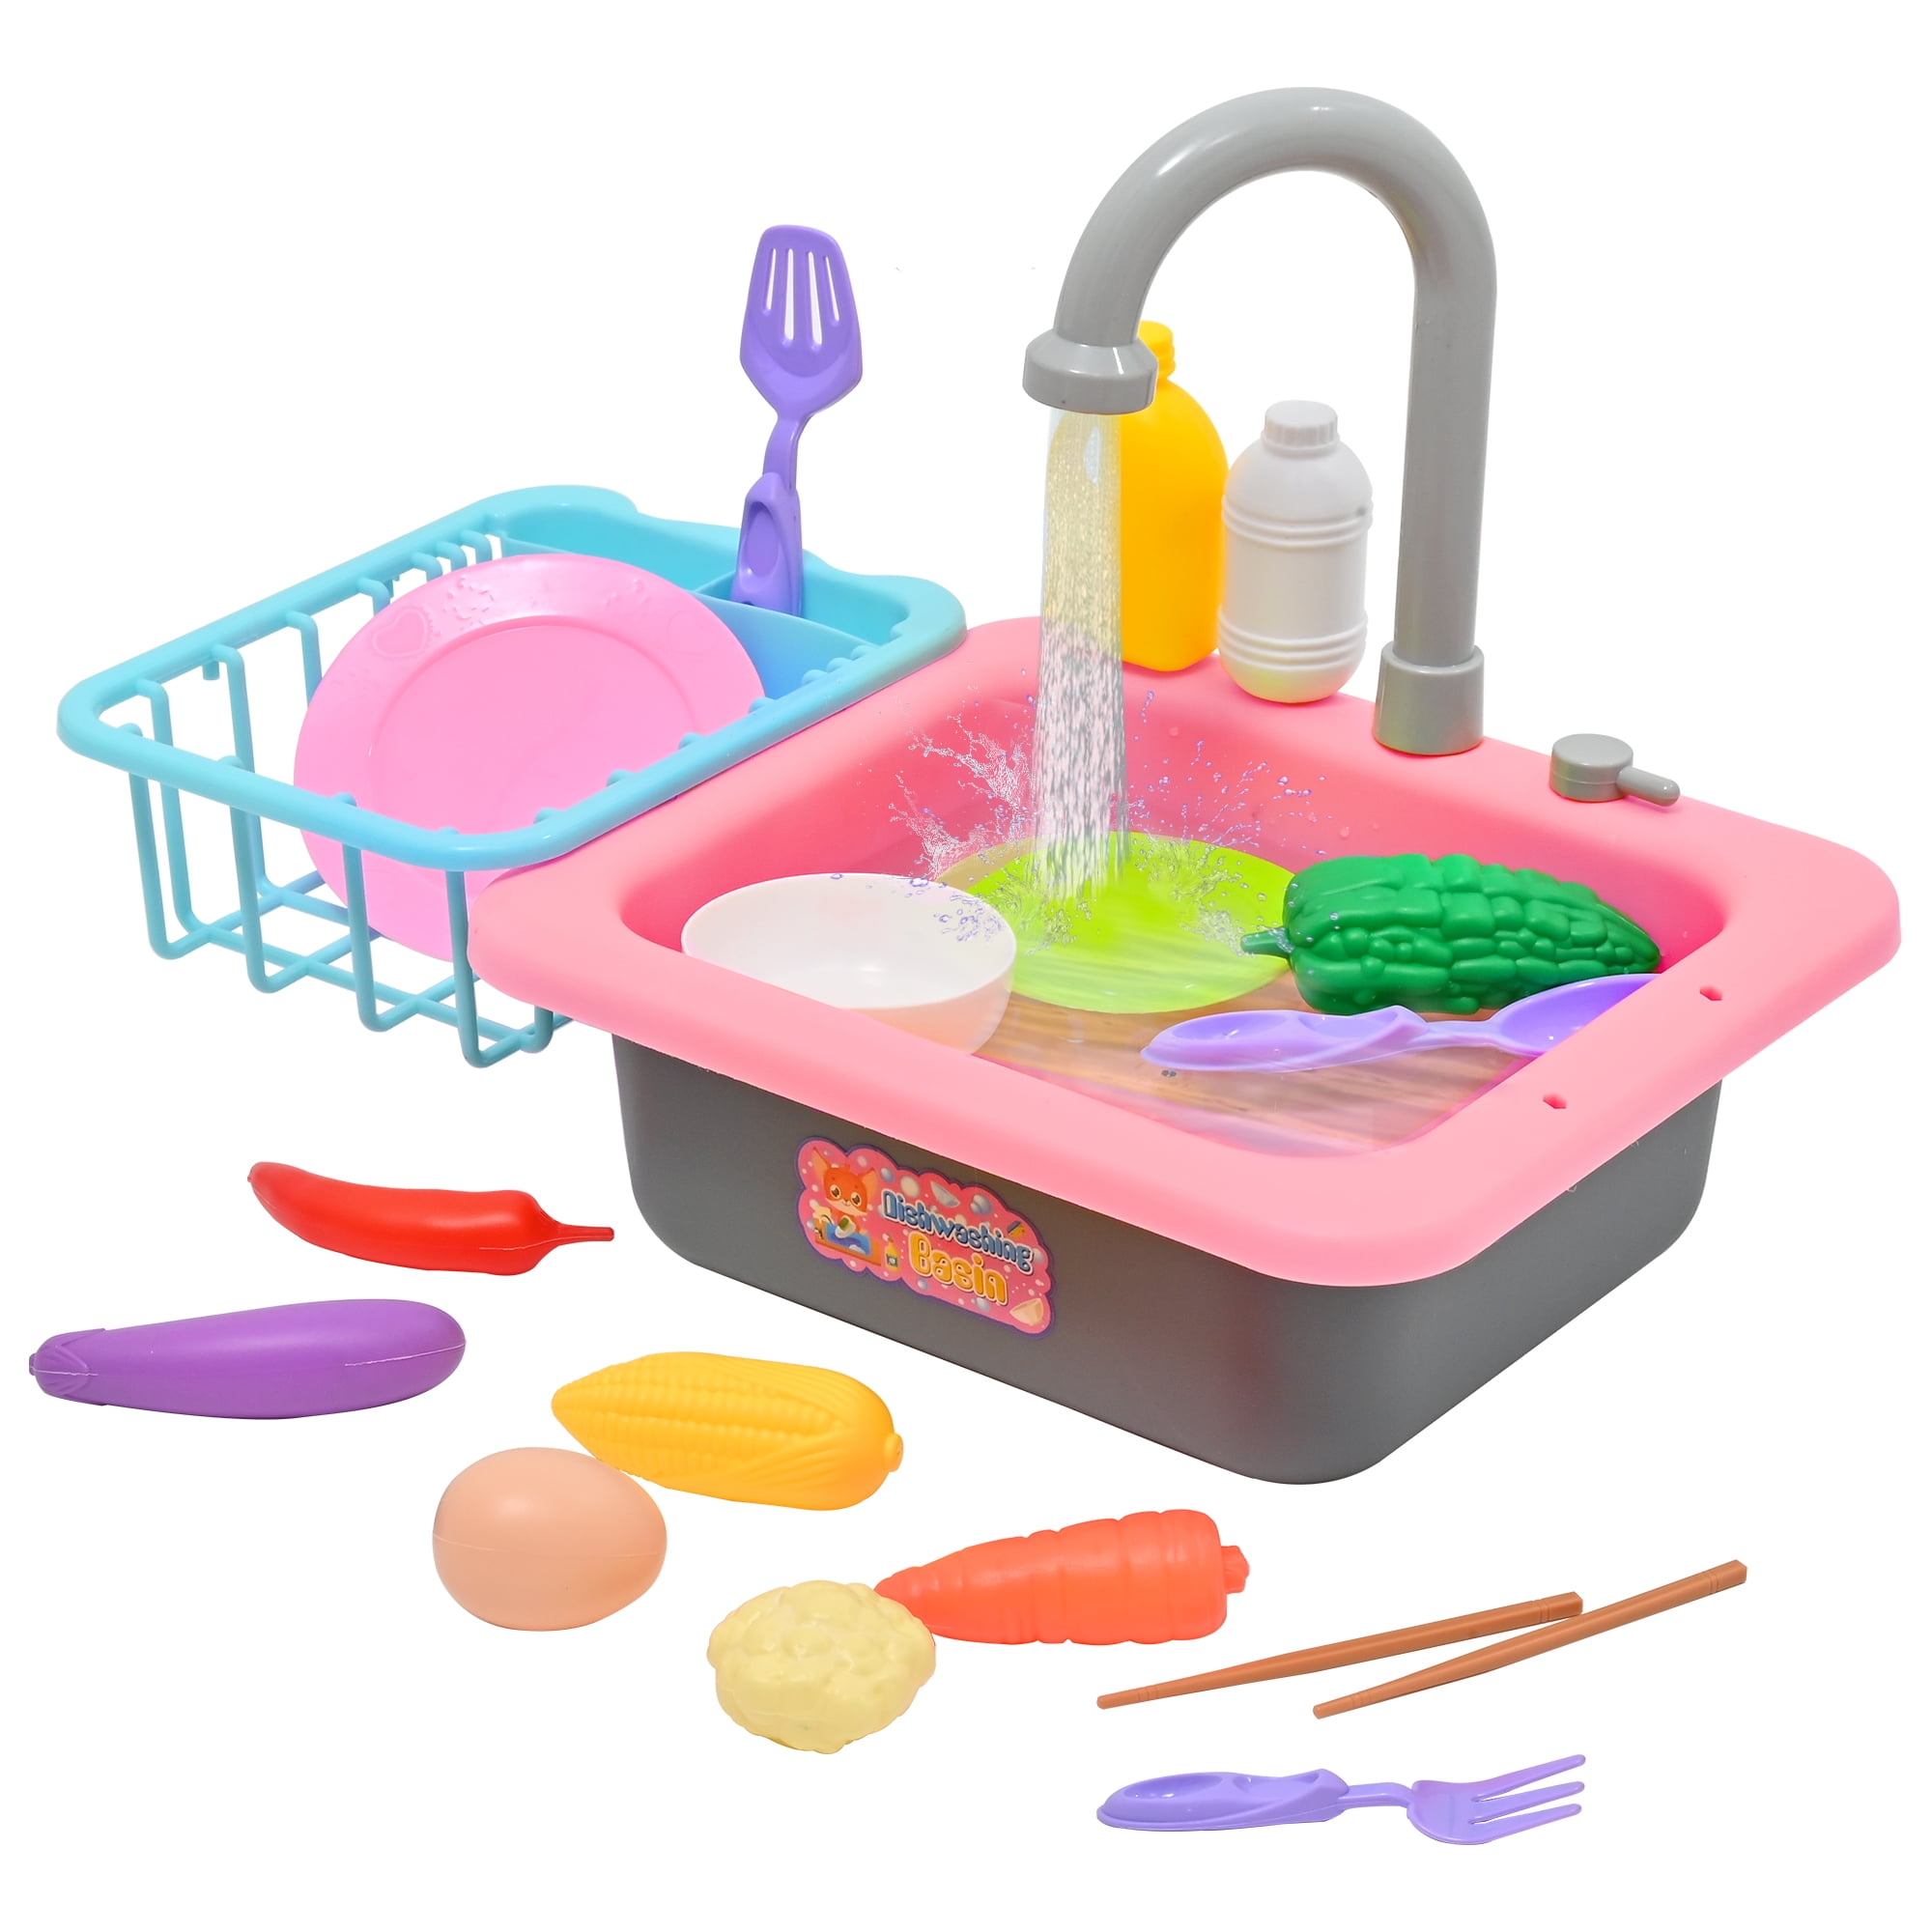 Kids' Kitchen Toy Set: Mini Electric Can Add Water, Rotation